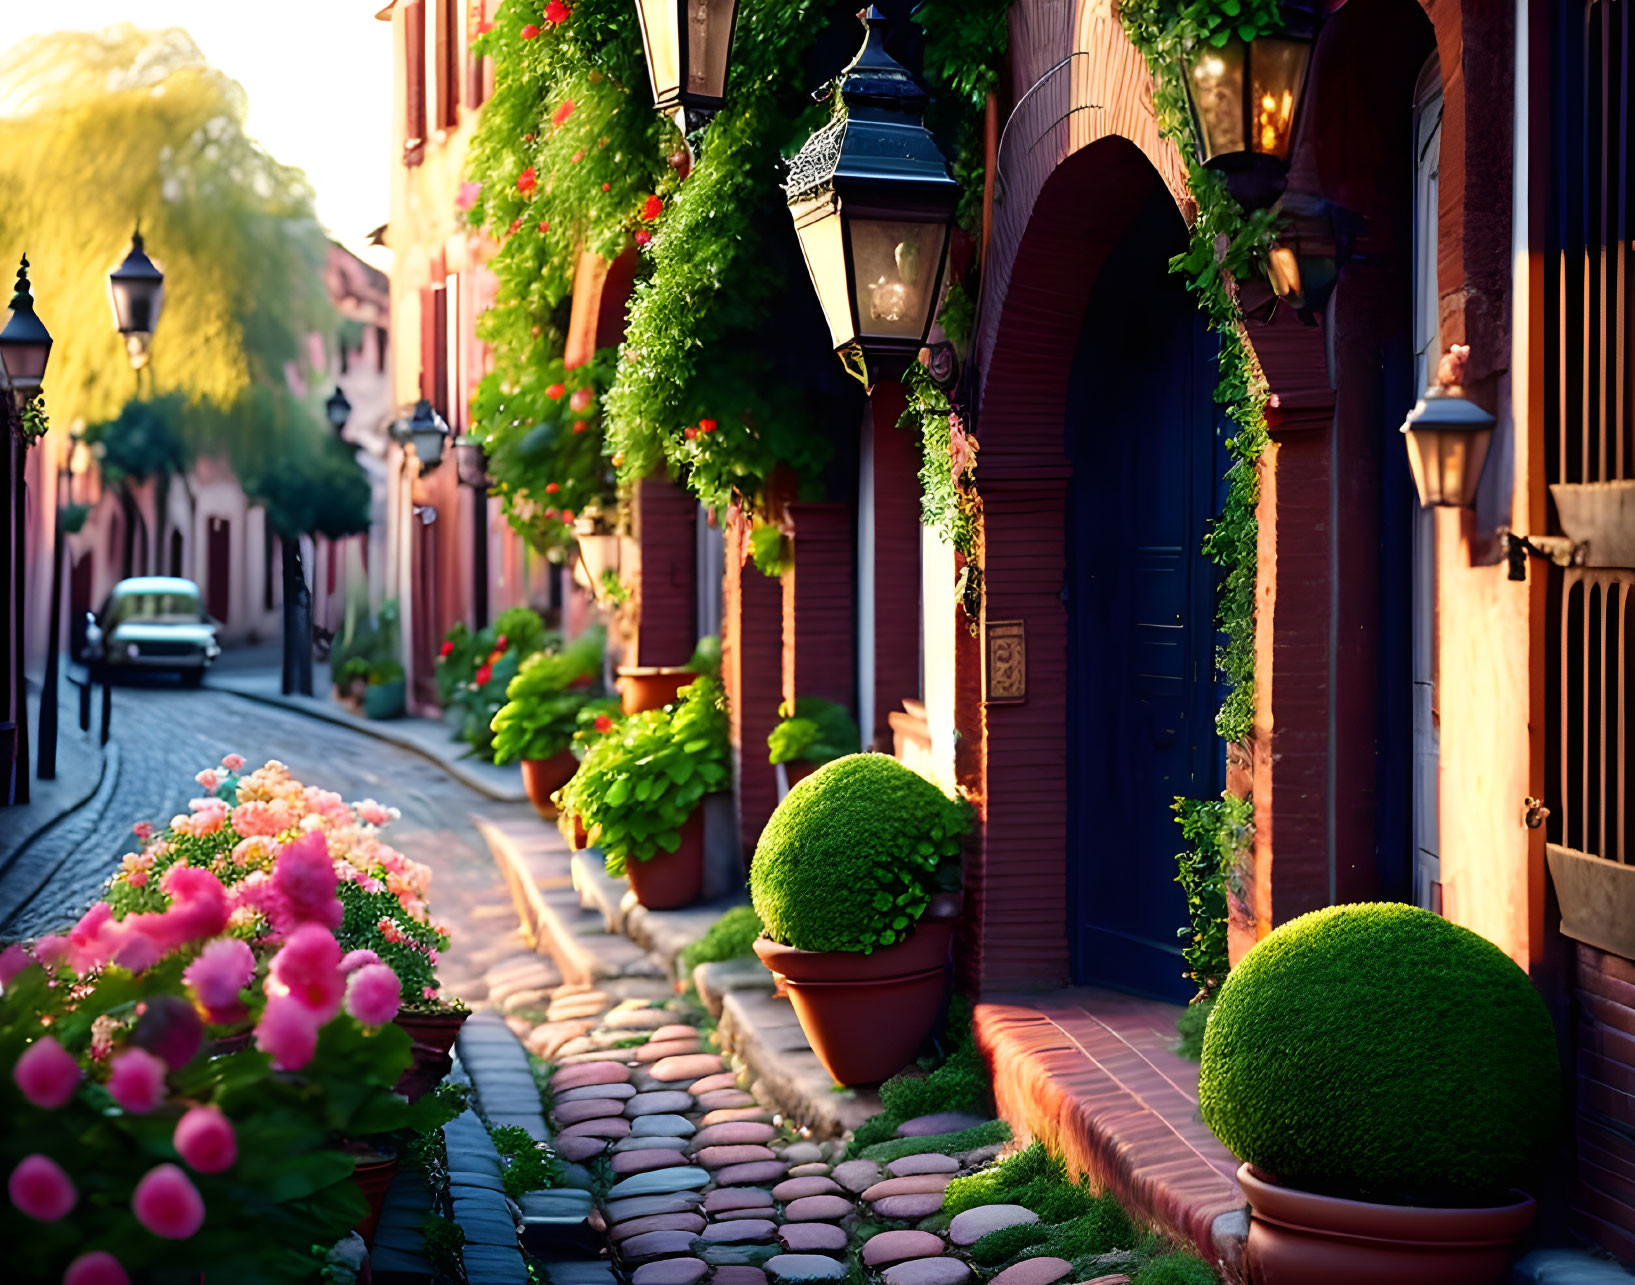 Cobblestone Street with Potted Plants and Arched Doorway at Dusk